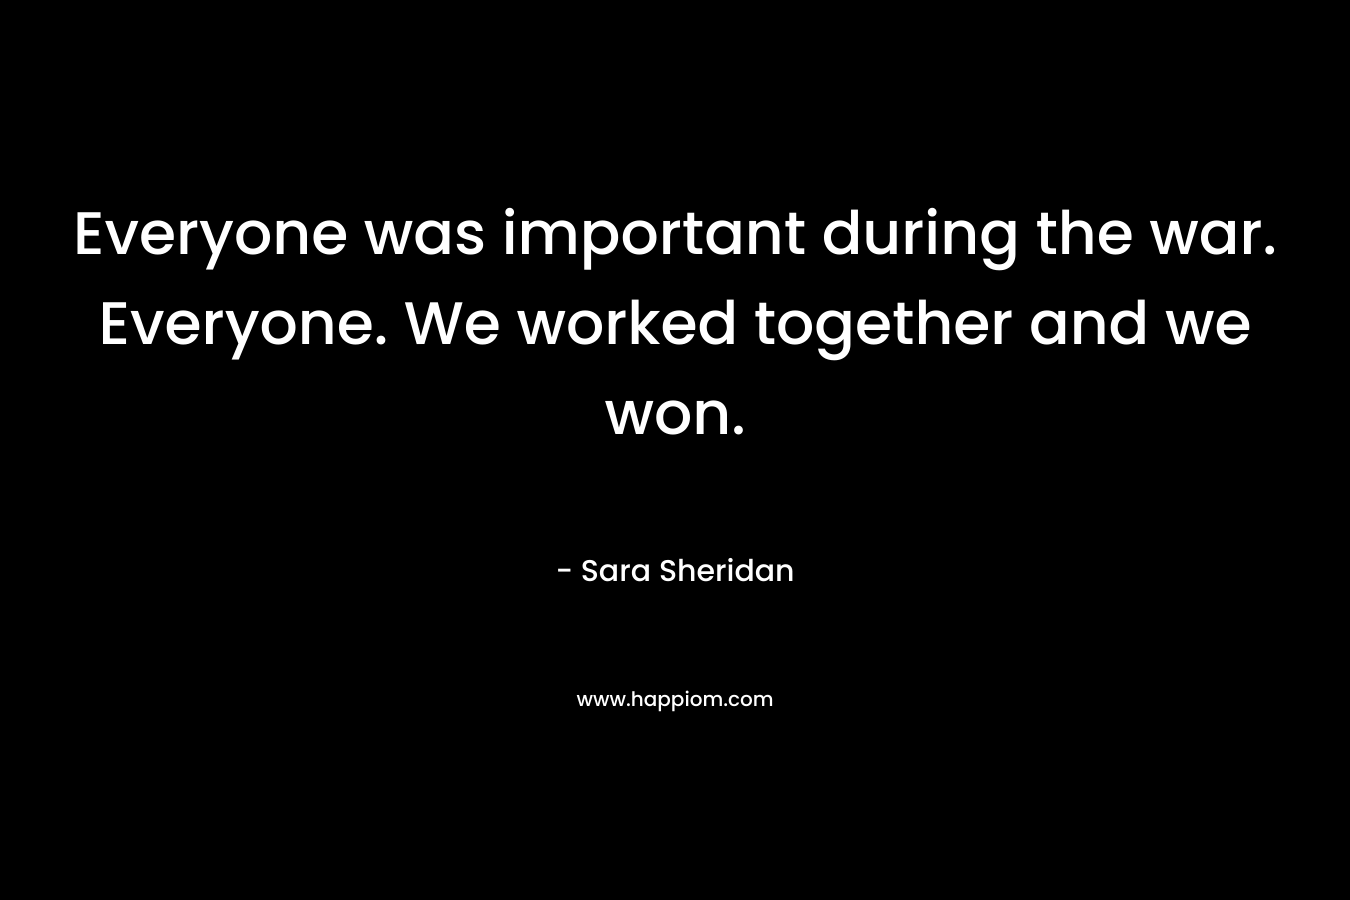 Everyone was important during the war. Everyone. We worked together and we won. – Sara Sheridan